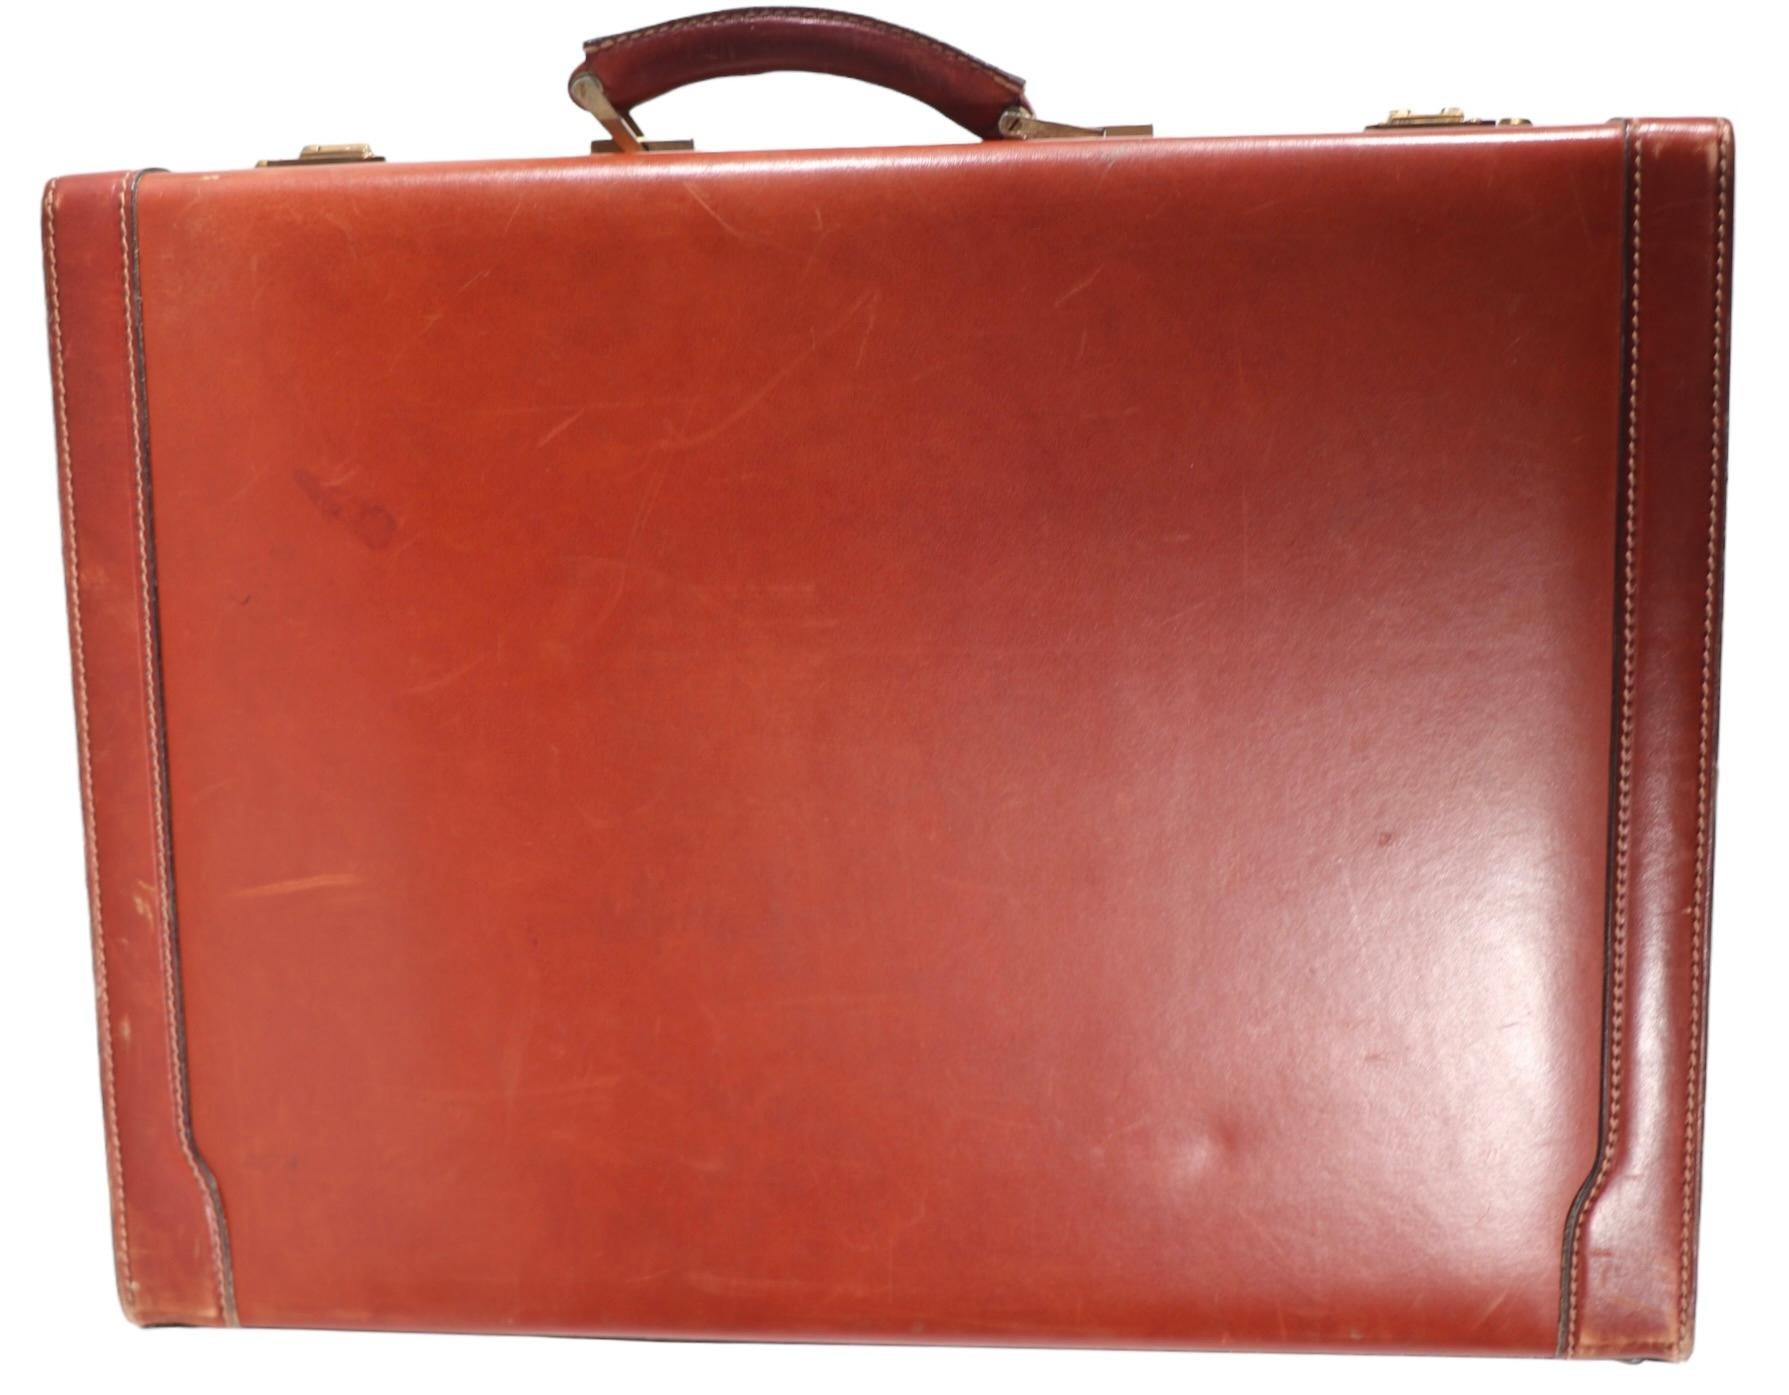  Mid Century Art Deco Hard Case Leather Attache Briefcase  after Bally, Hermes  For Sale 3